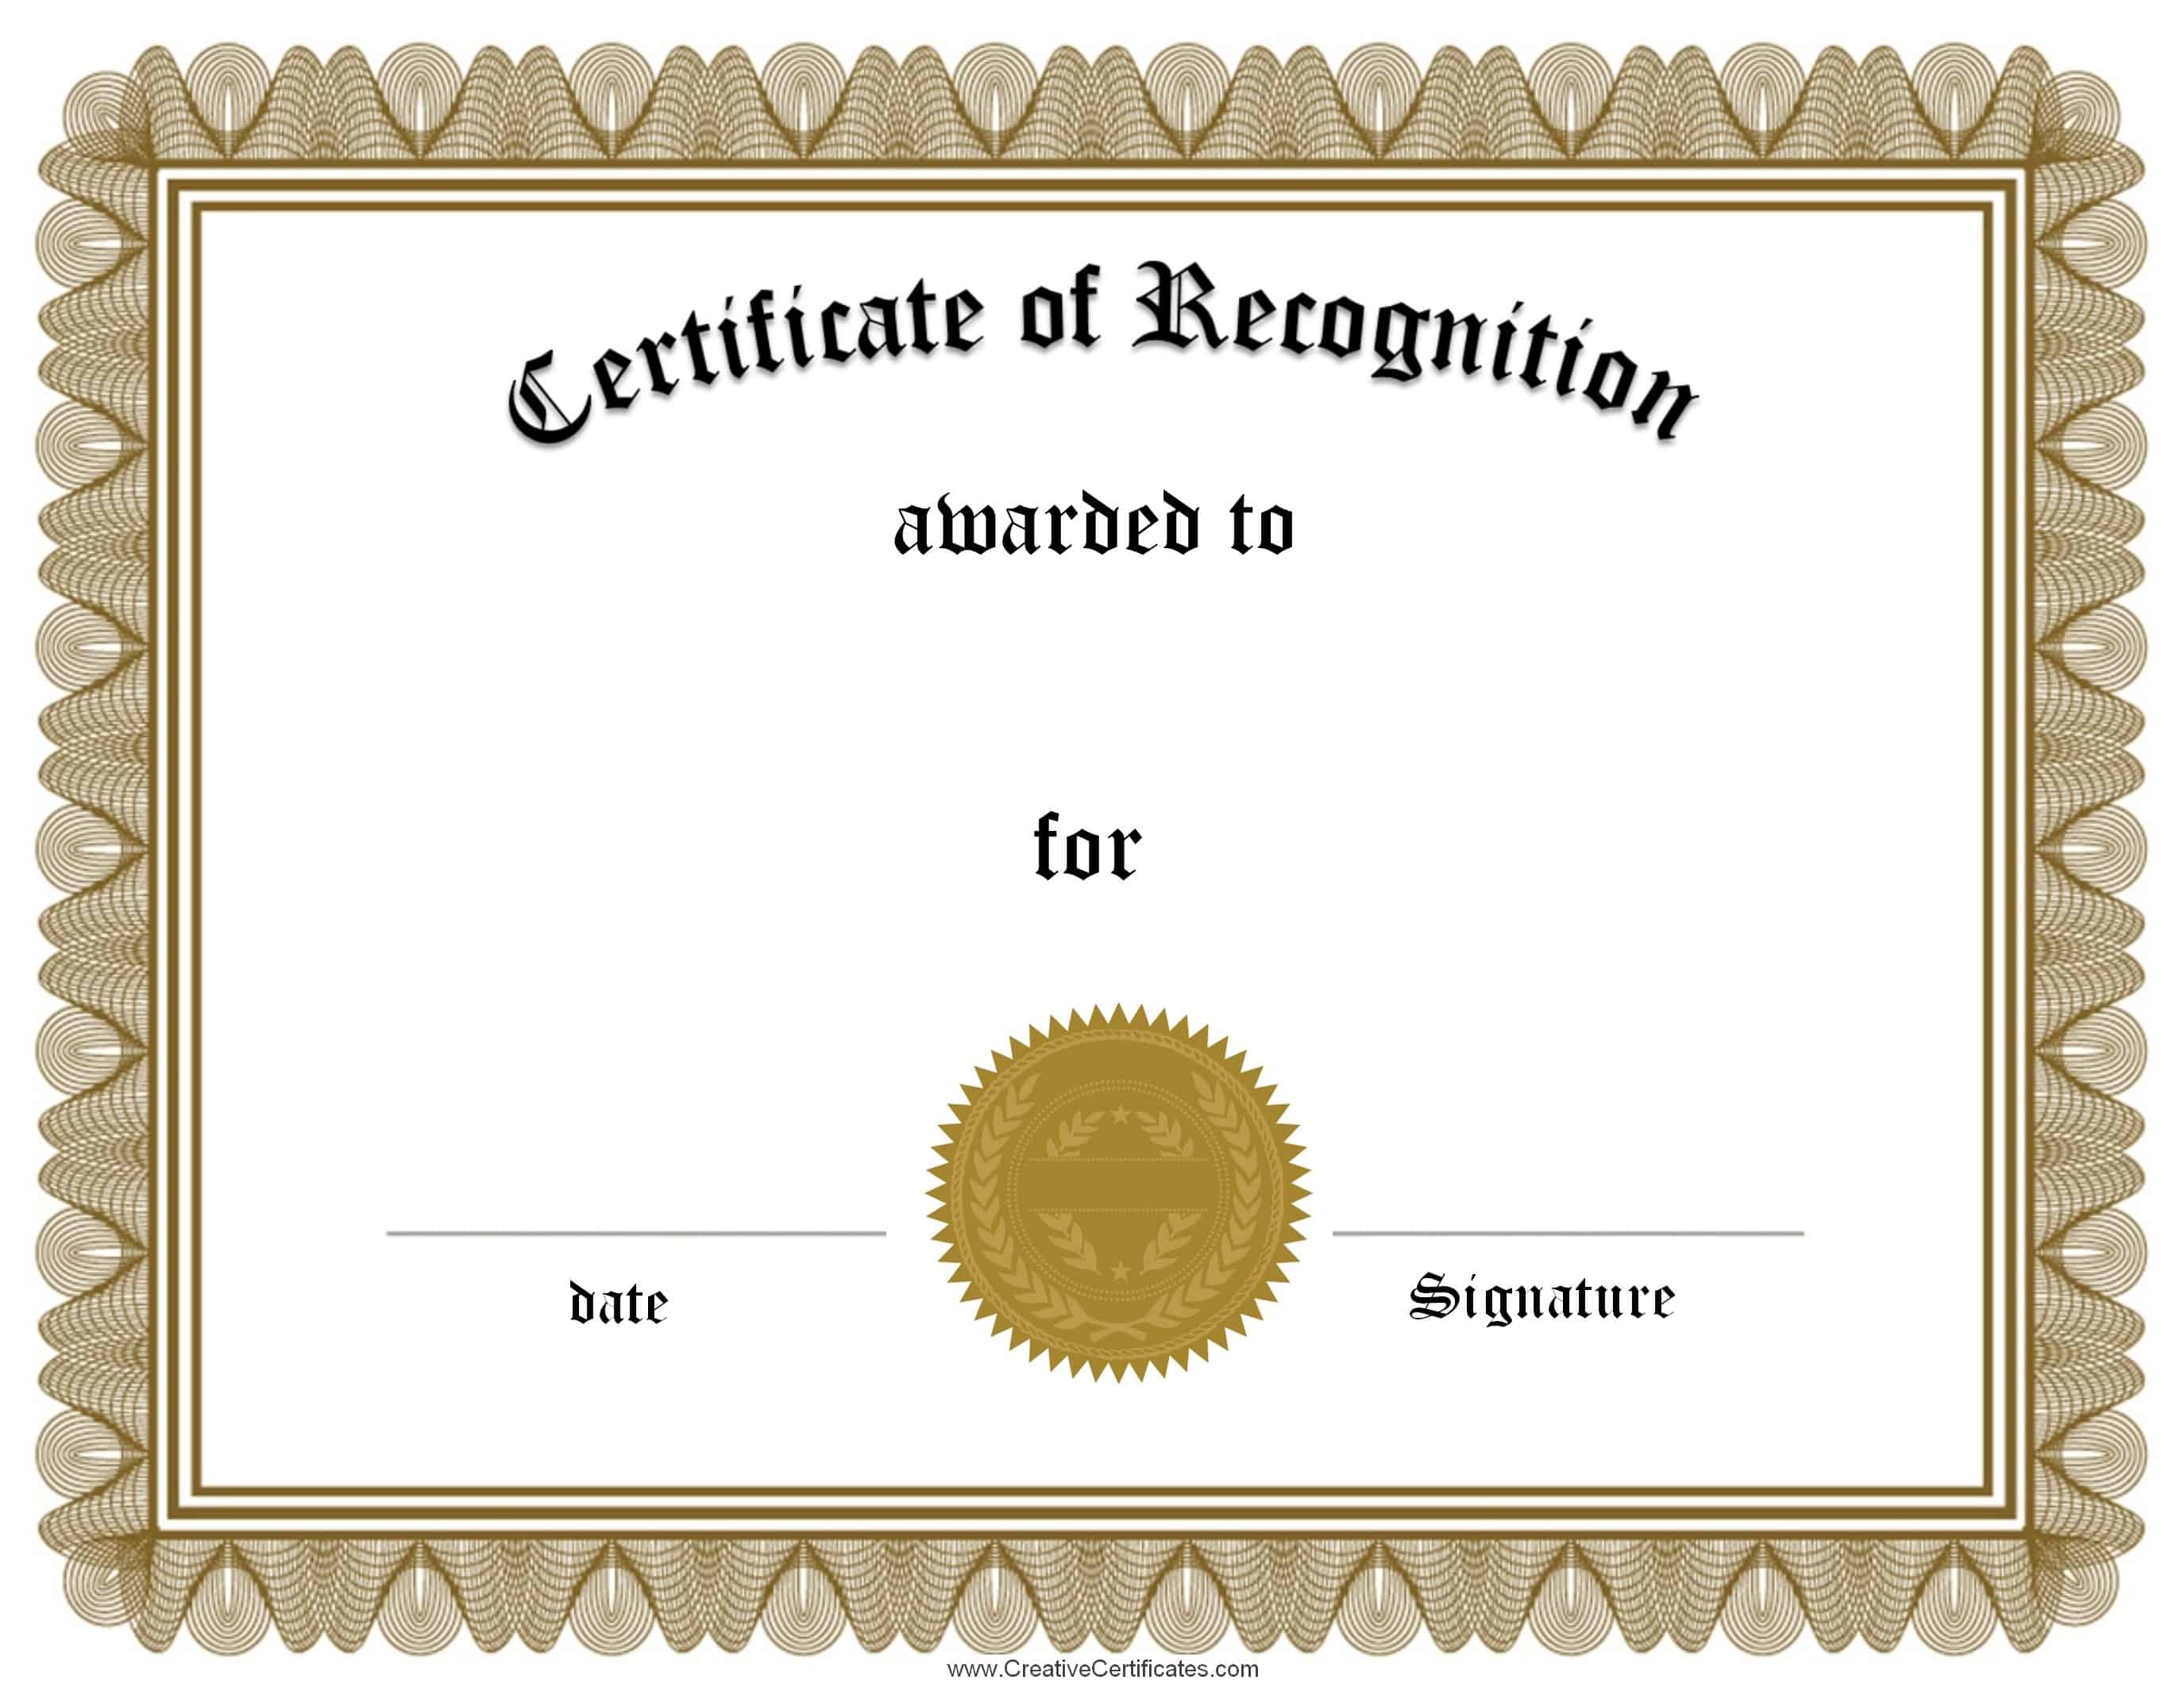 certificate of recognition template